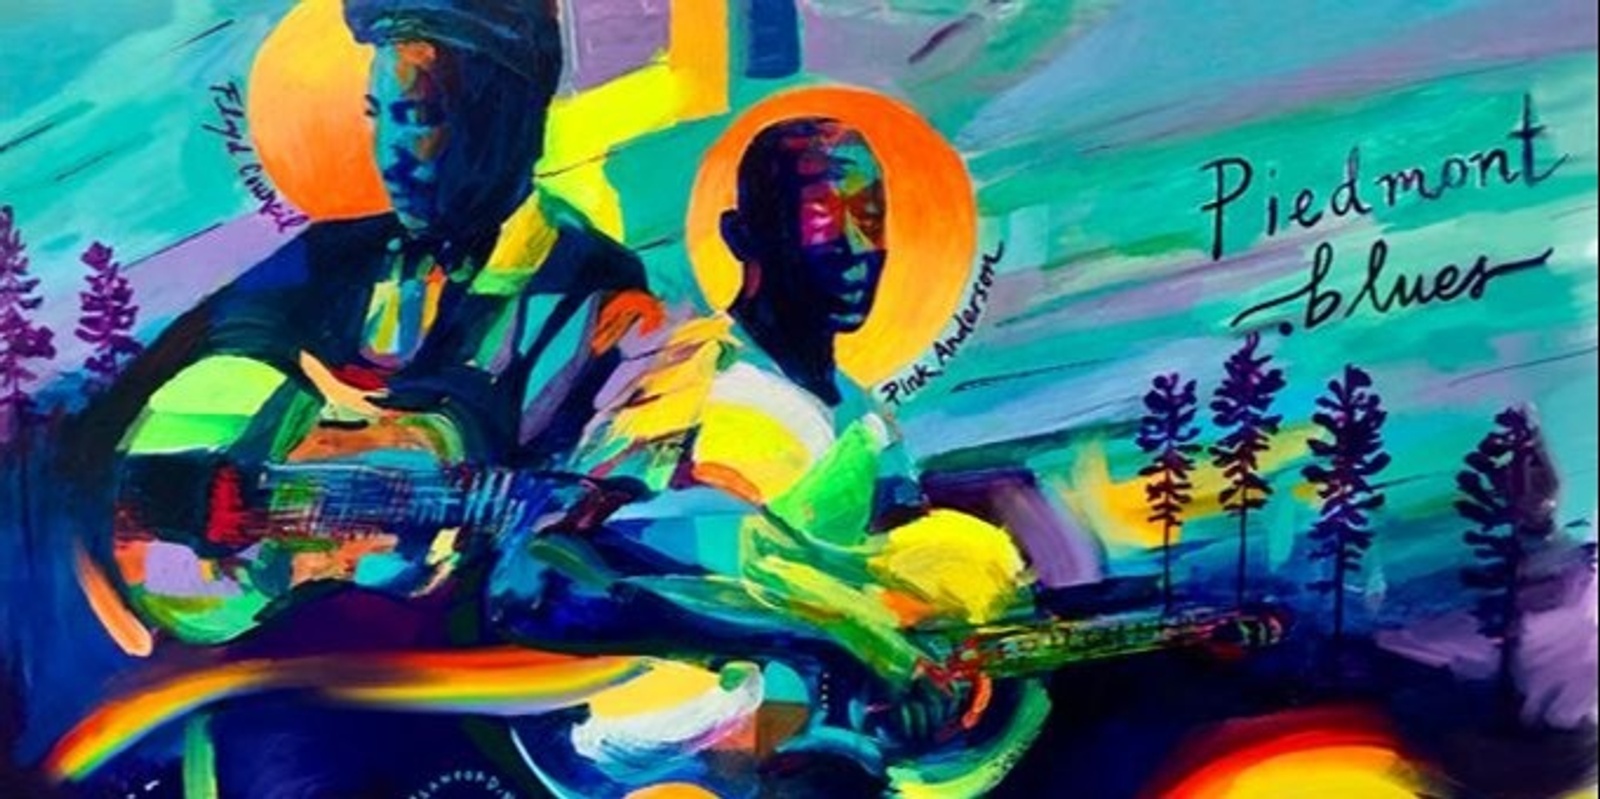 Banner image for Piedmont Blues Mural Dedication in Sanford, NC